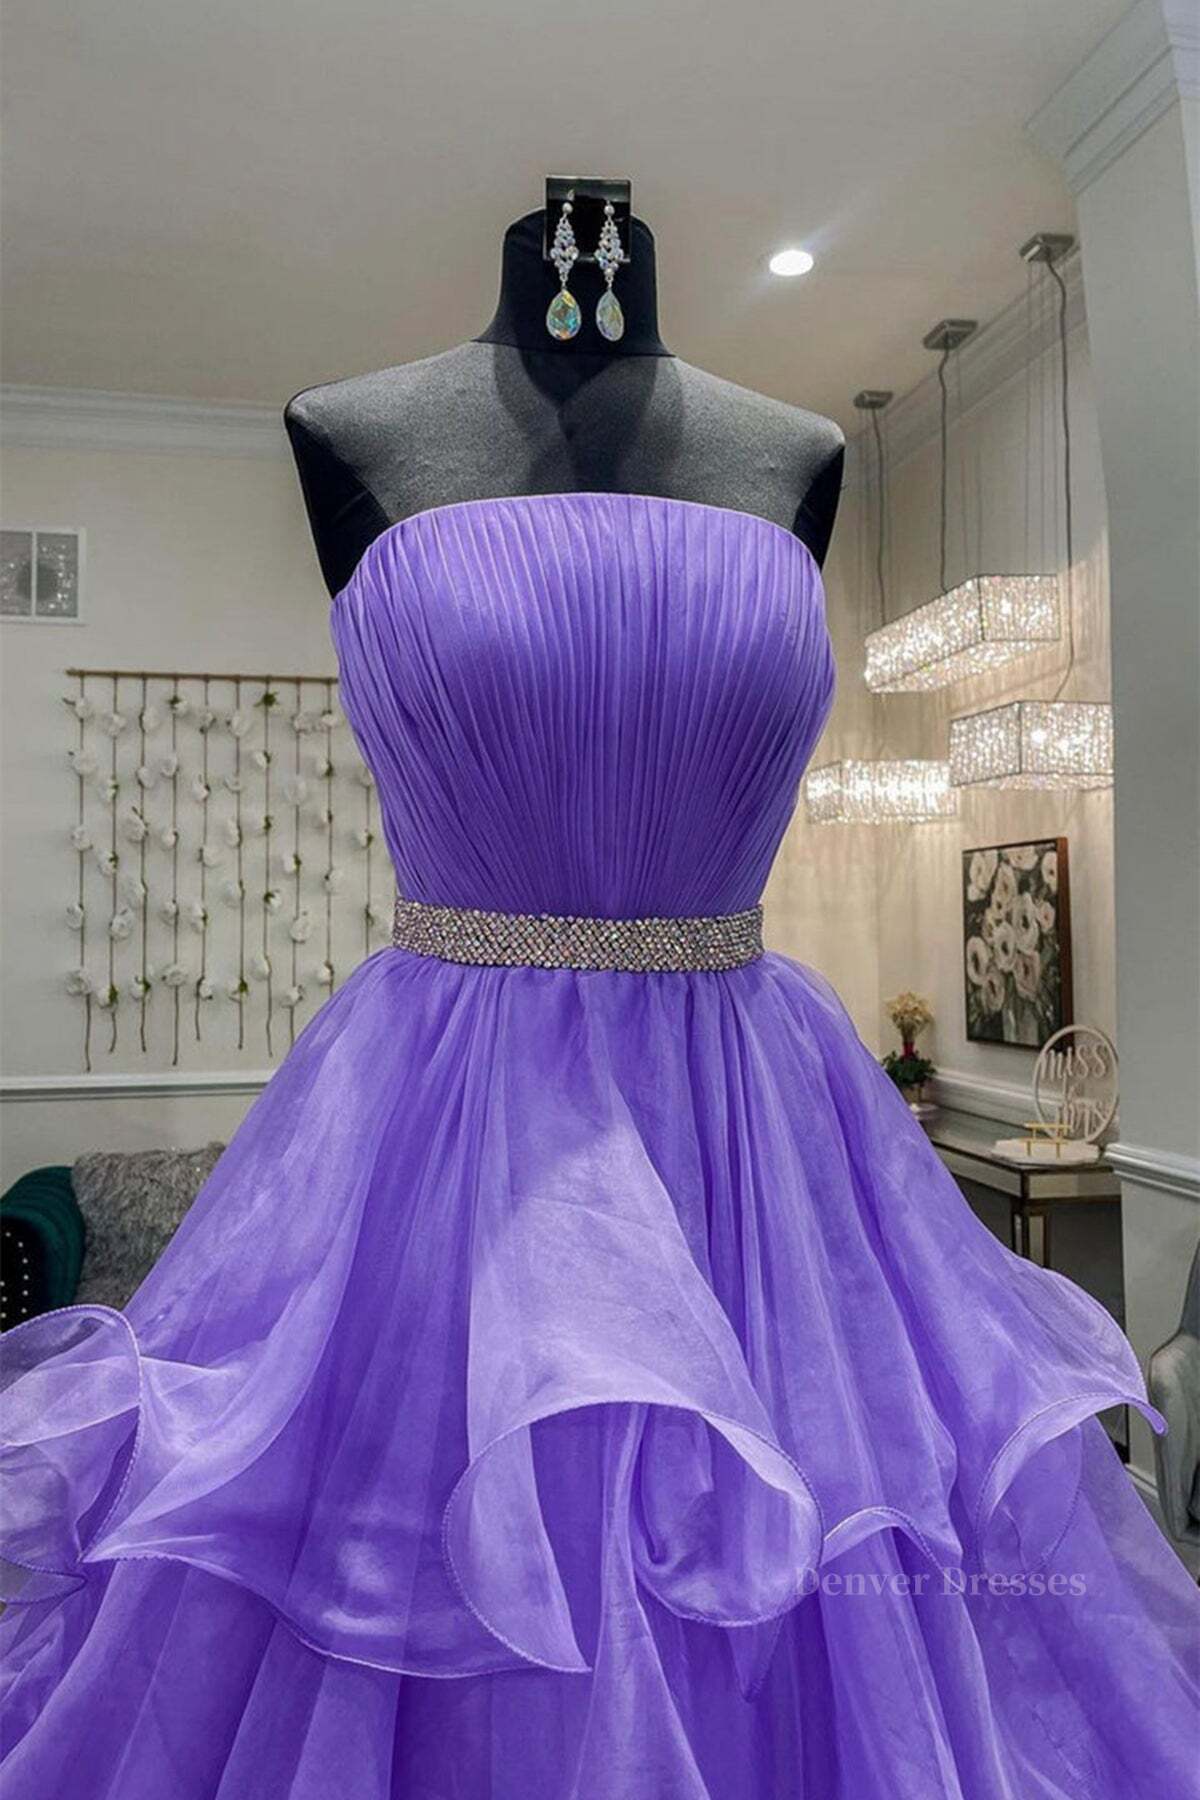 Bridesmaid Dresses Neutral, Gorgeous Strapless Layered Purple Tulle Long Prom Dresses with Belt, Purple Formal Evening Dresses, Purple Ball Gown